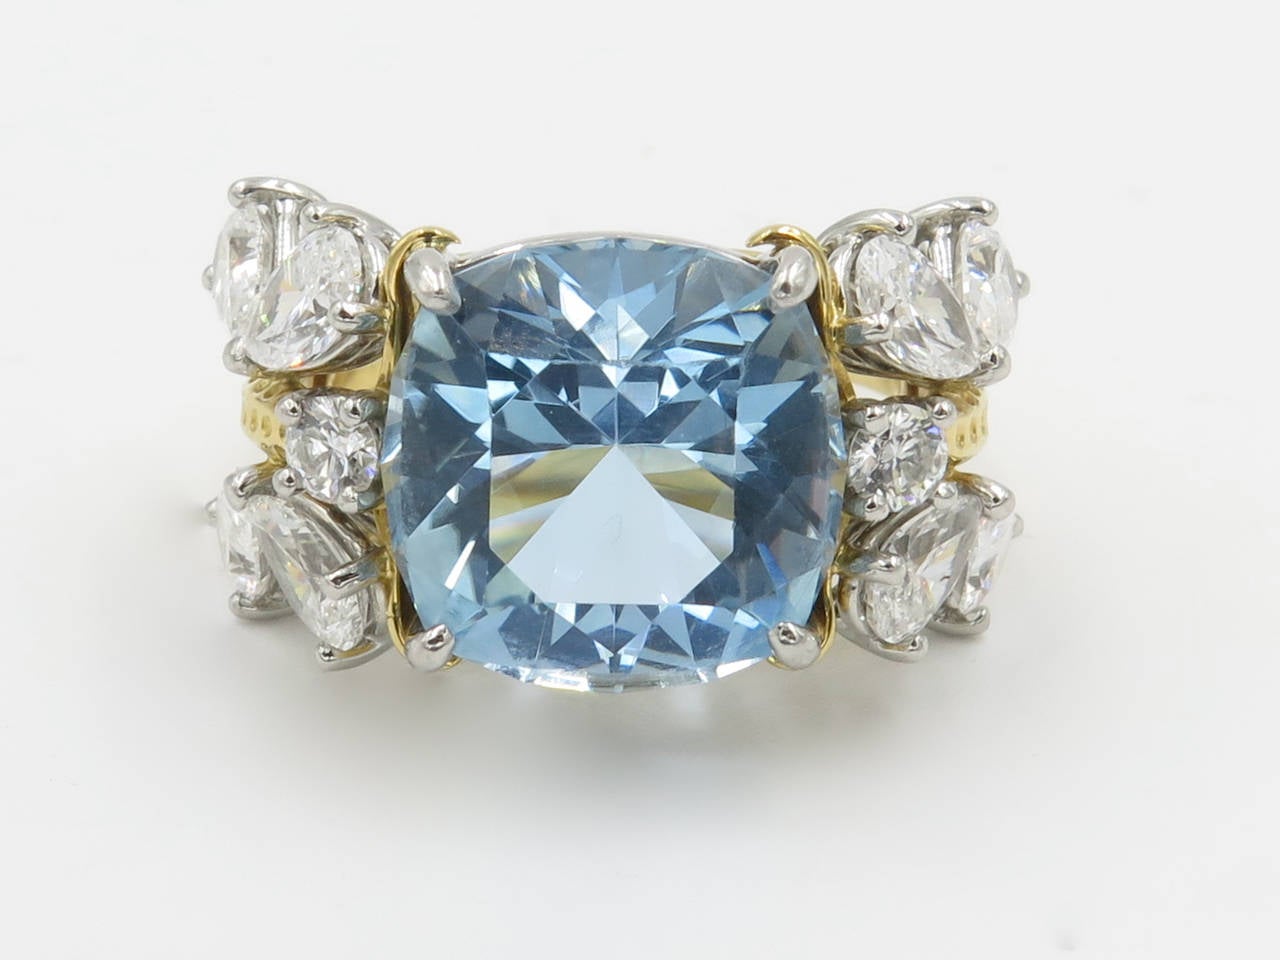 An 18 karat yellow gold, aquamarine and diamond ring. Signed Tiffany & Co. Schlumberger. The ring centers a cushion cut aquamarine flanked by (8) pear shaped diamonds and (2) round brilliant cut diamonds. The ring is set with a total of 2.53 carats